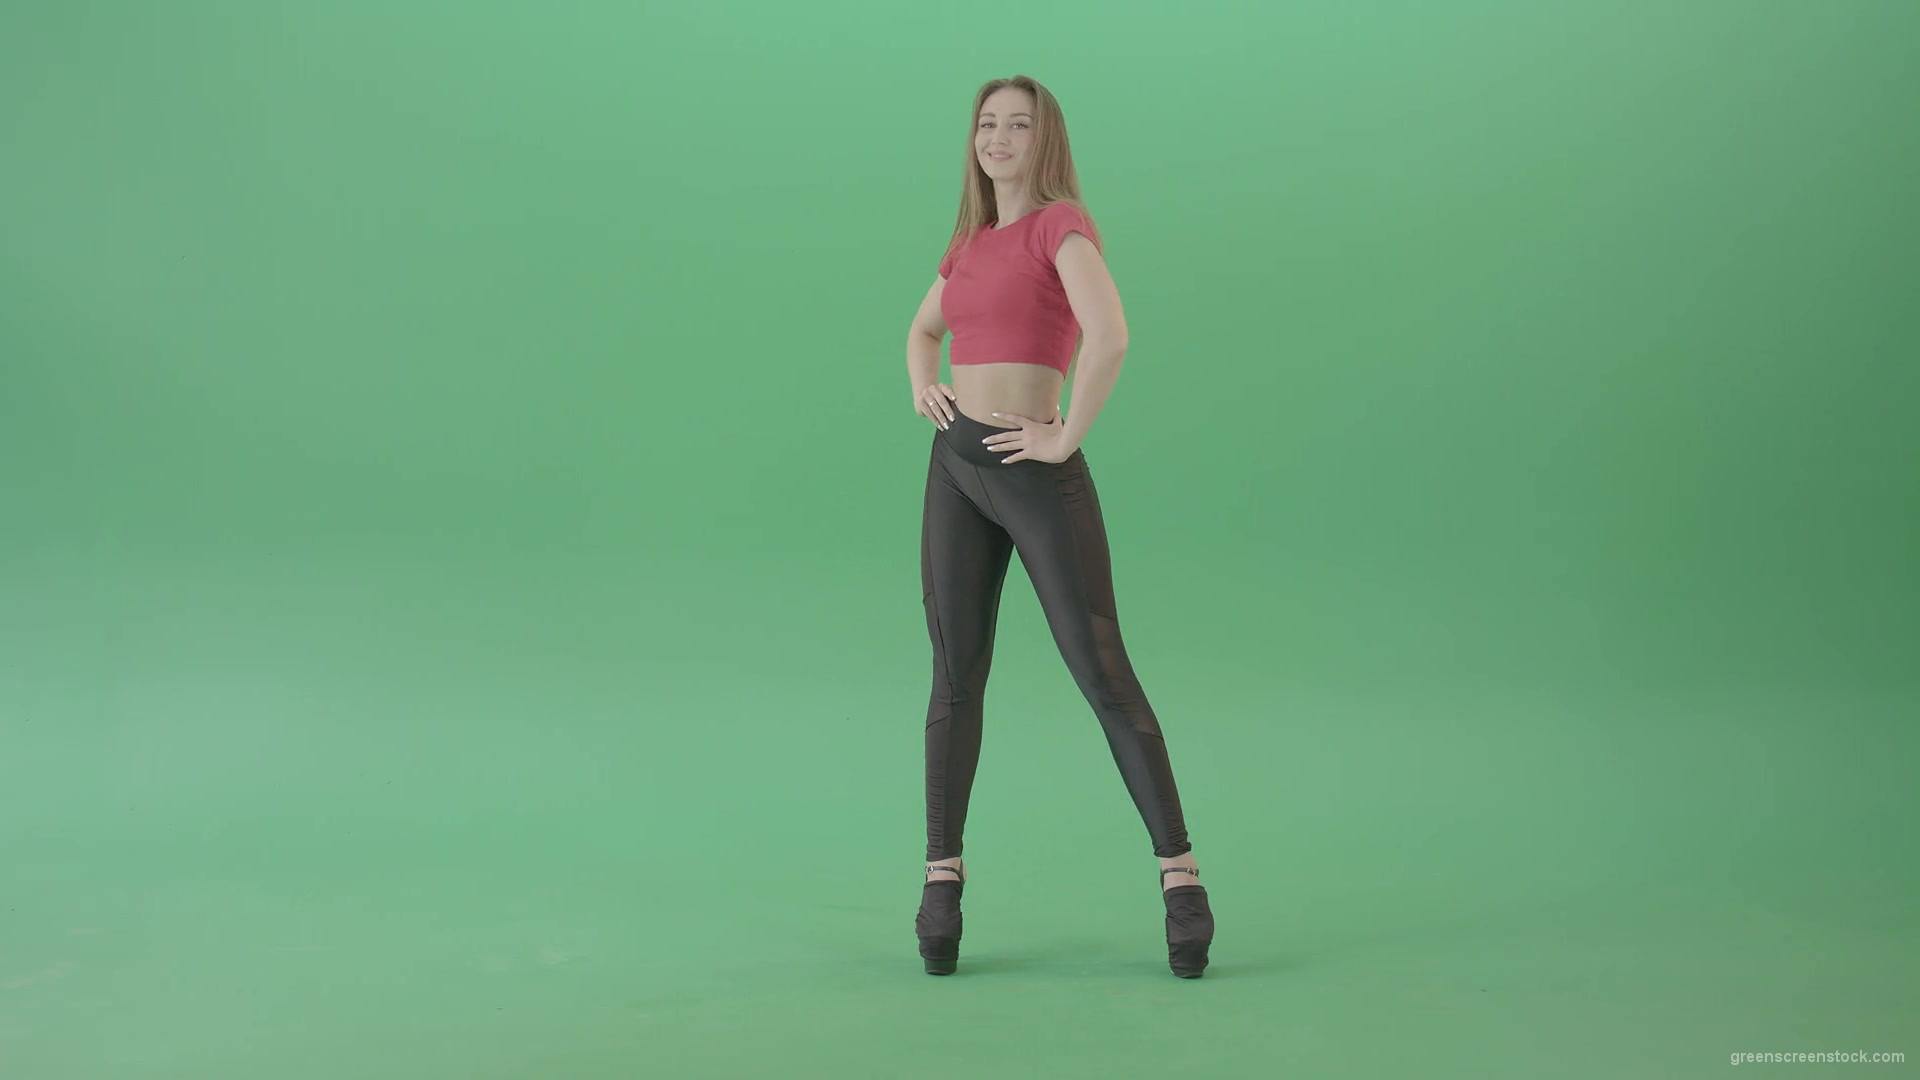 Advertising-Girl-posing-in-front-view-full-size-on-green-screen-4K-Video-Footage-1920_004 Green Screen Stock